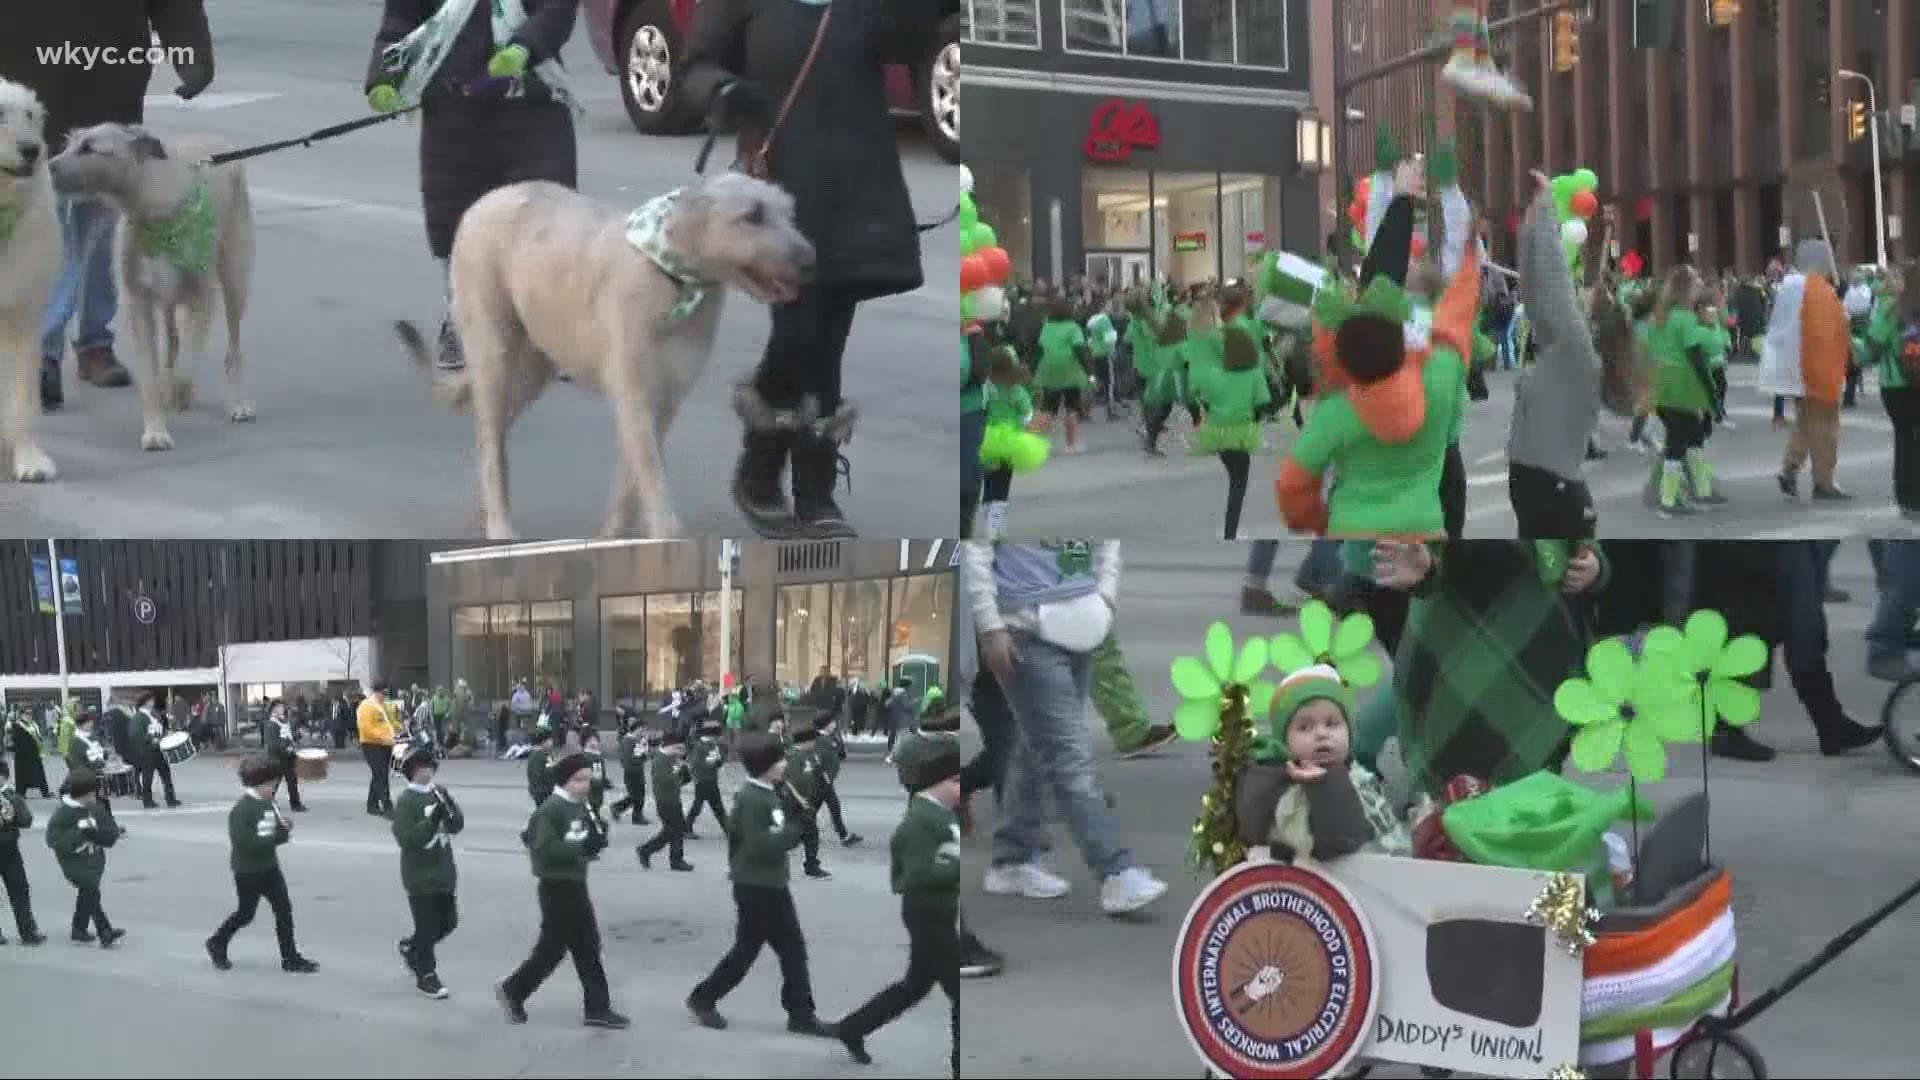 The luck of the Irish is not with Cleveland again this year as the annual St. Paddy's day parade has been canceled. But what about other events? Will Ujek reports.